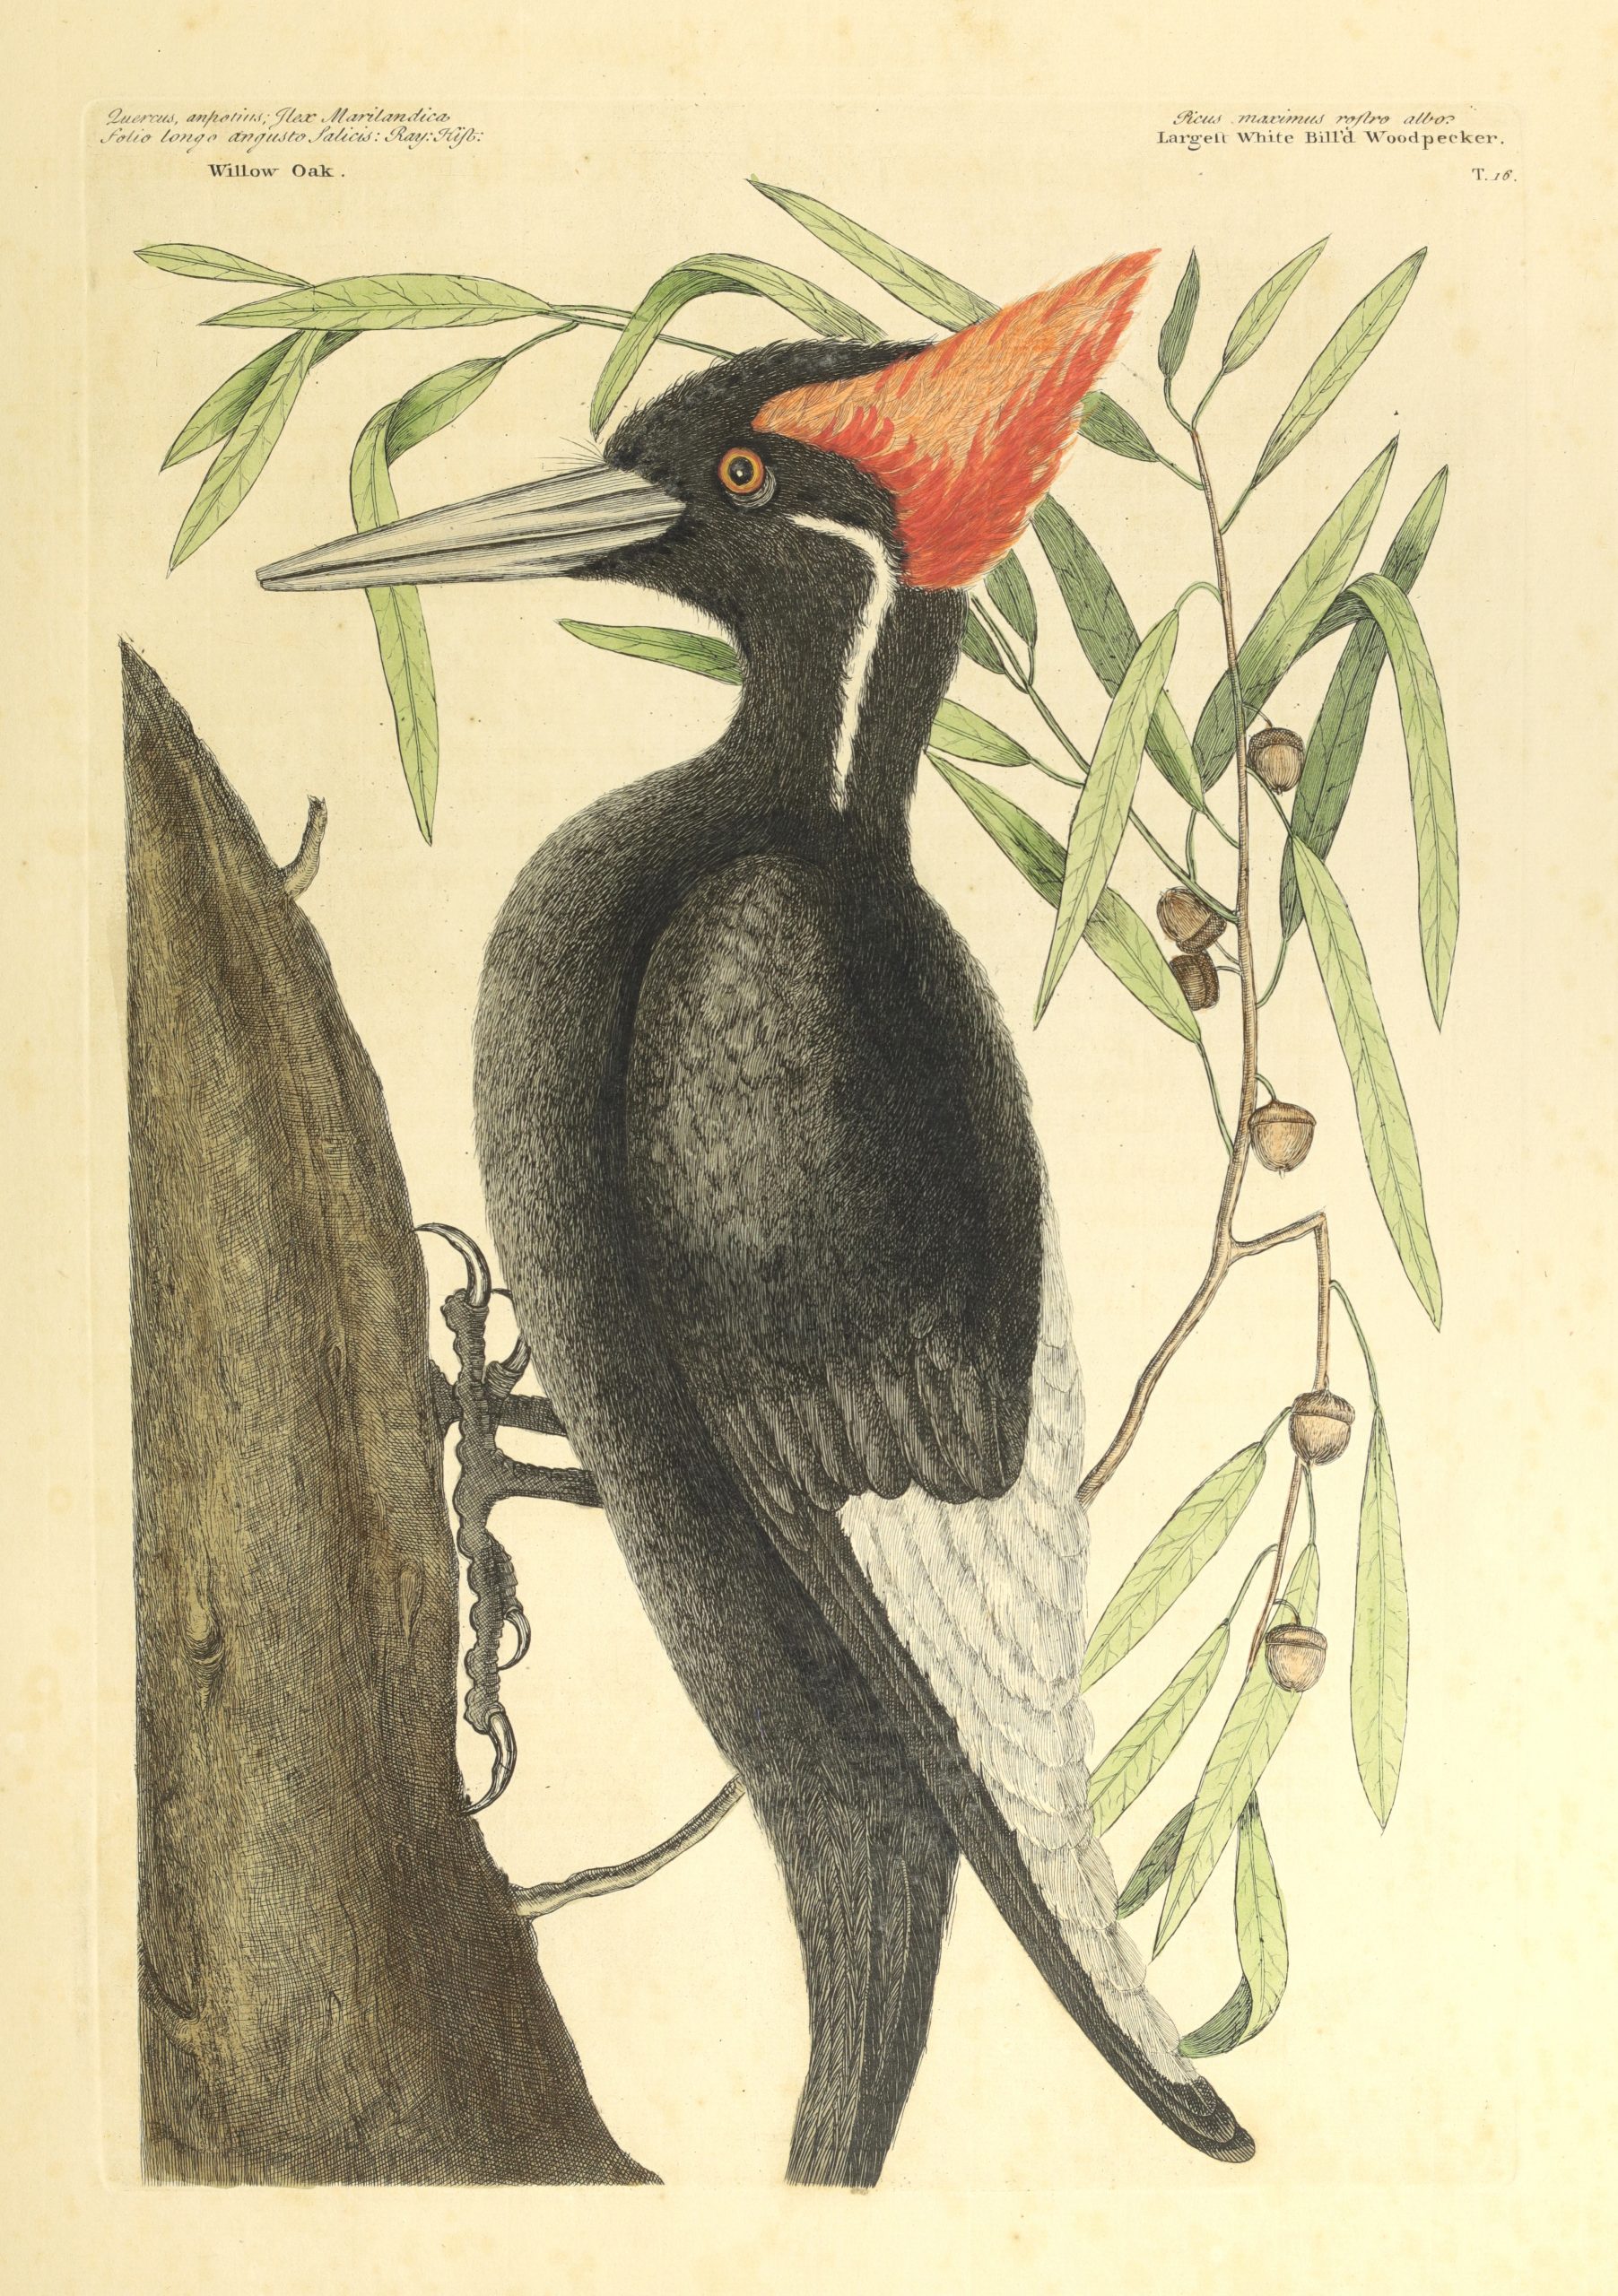 The ivory-billed woodpecker. Photography  courtesy of The Irvin Department of Rare Books and Special Collections, University of South Carolina Libraries, Columbia.